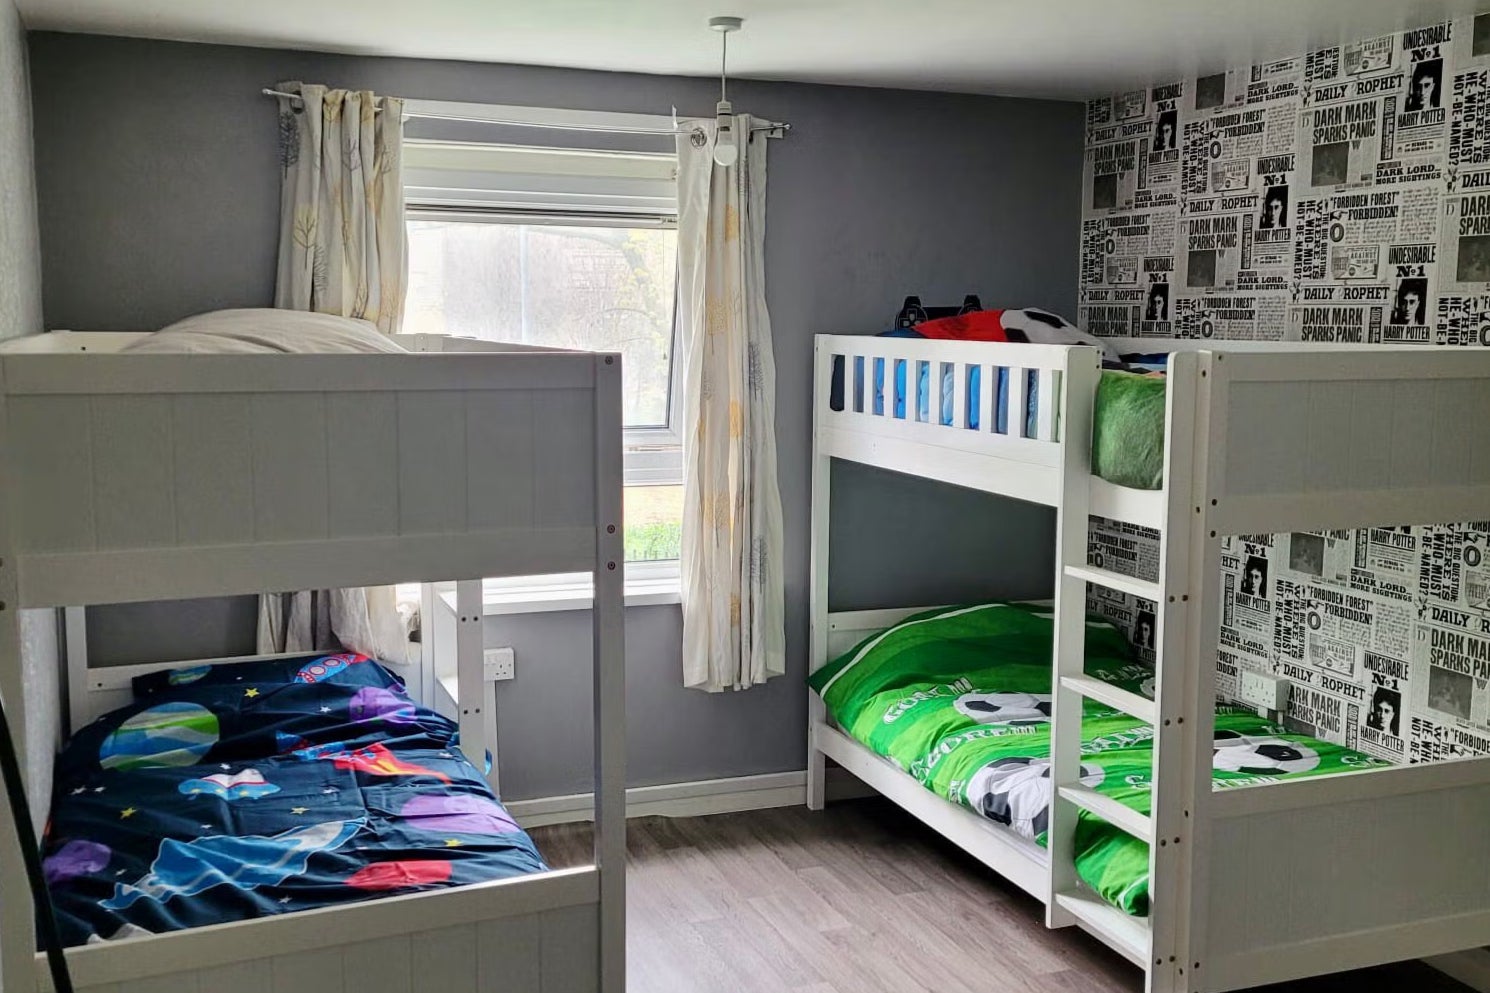 Zarach deliver bunk beds and single beds for children in need across north-west England